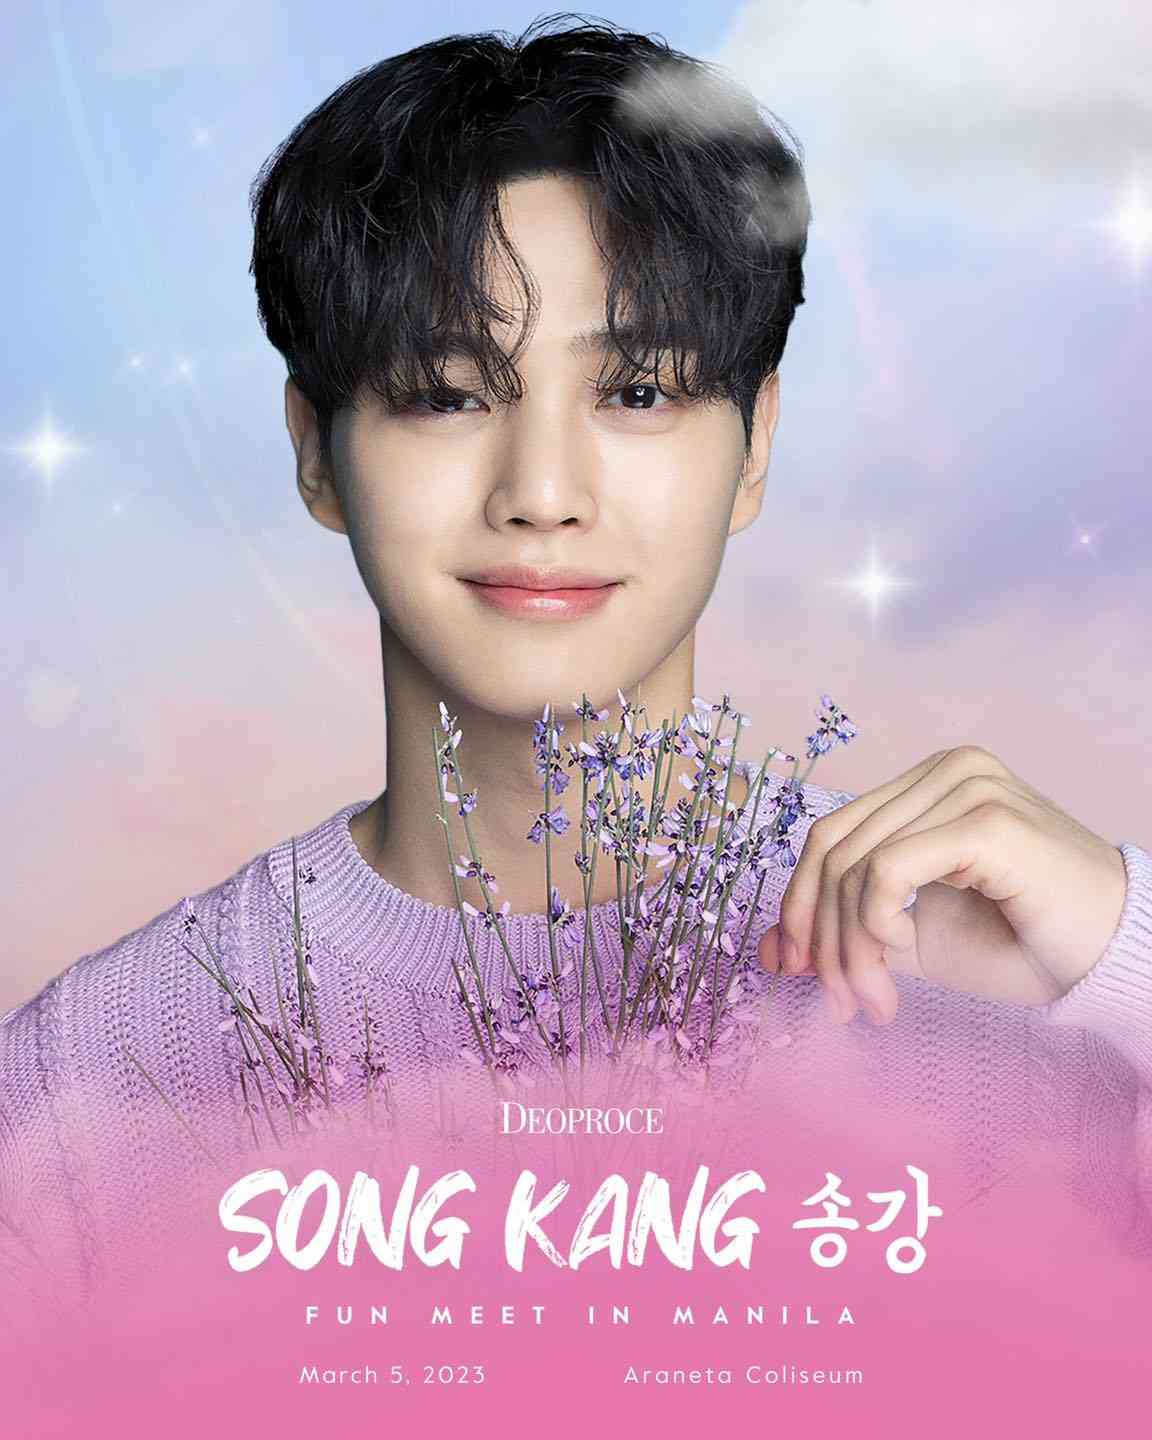 Song Kang to hold 'fun meet' in Manila in March